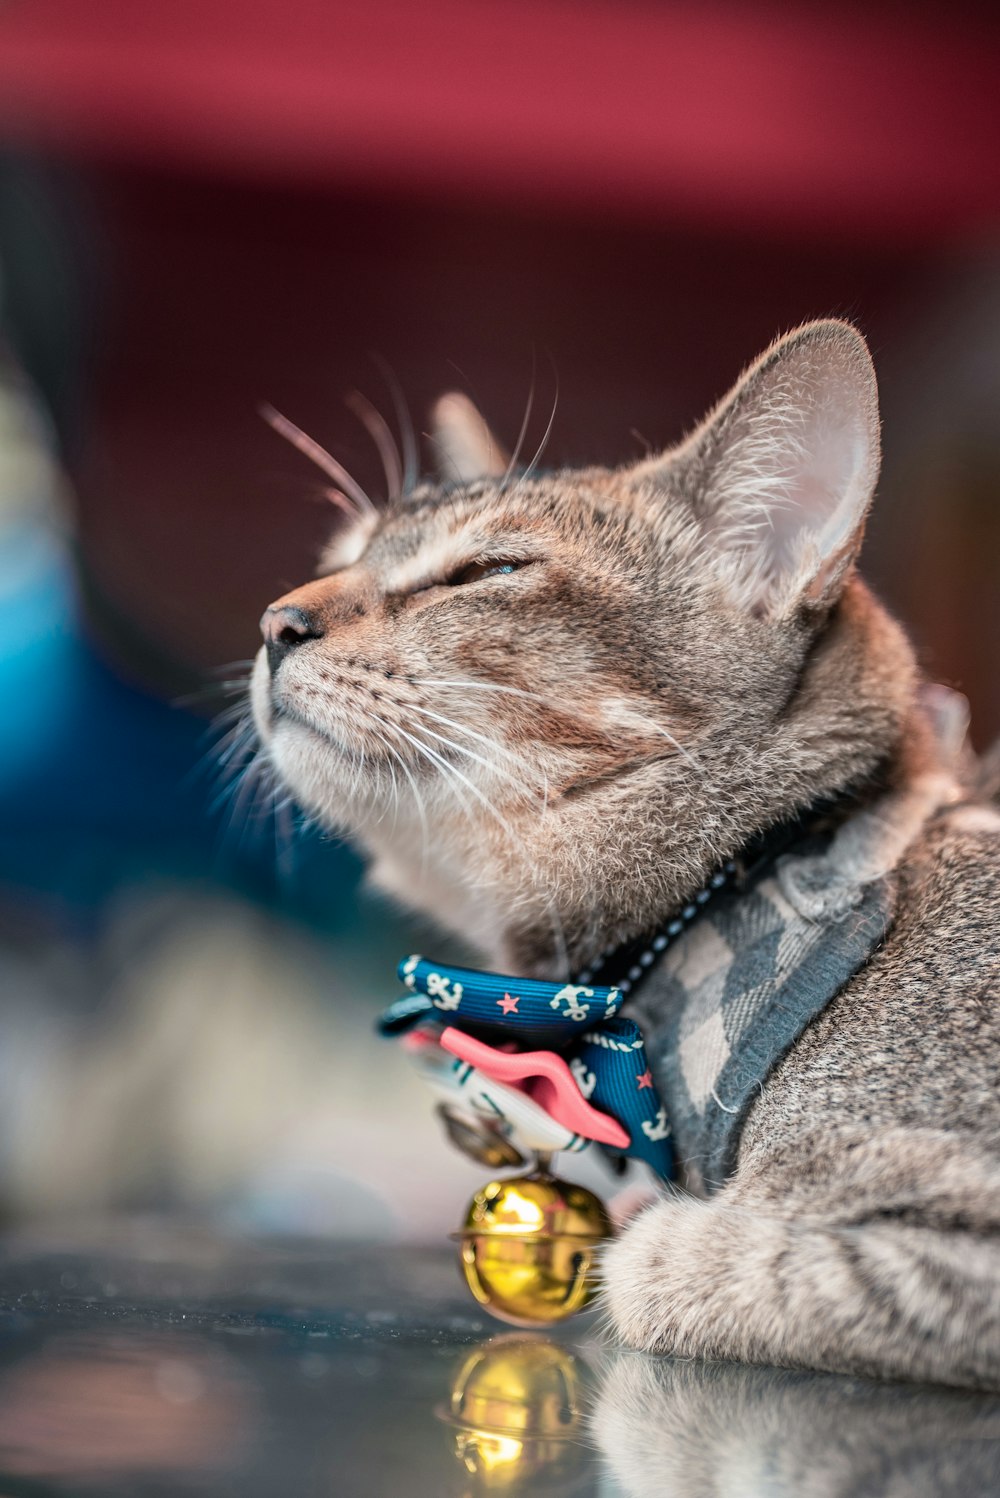 brown tabby cat wearing yellow and blue collar